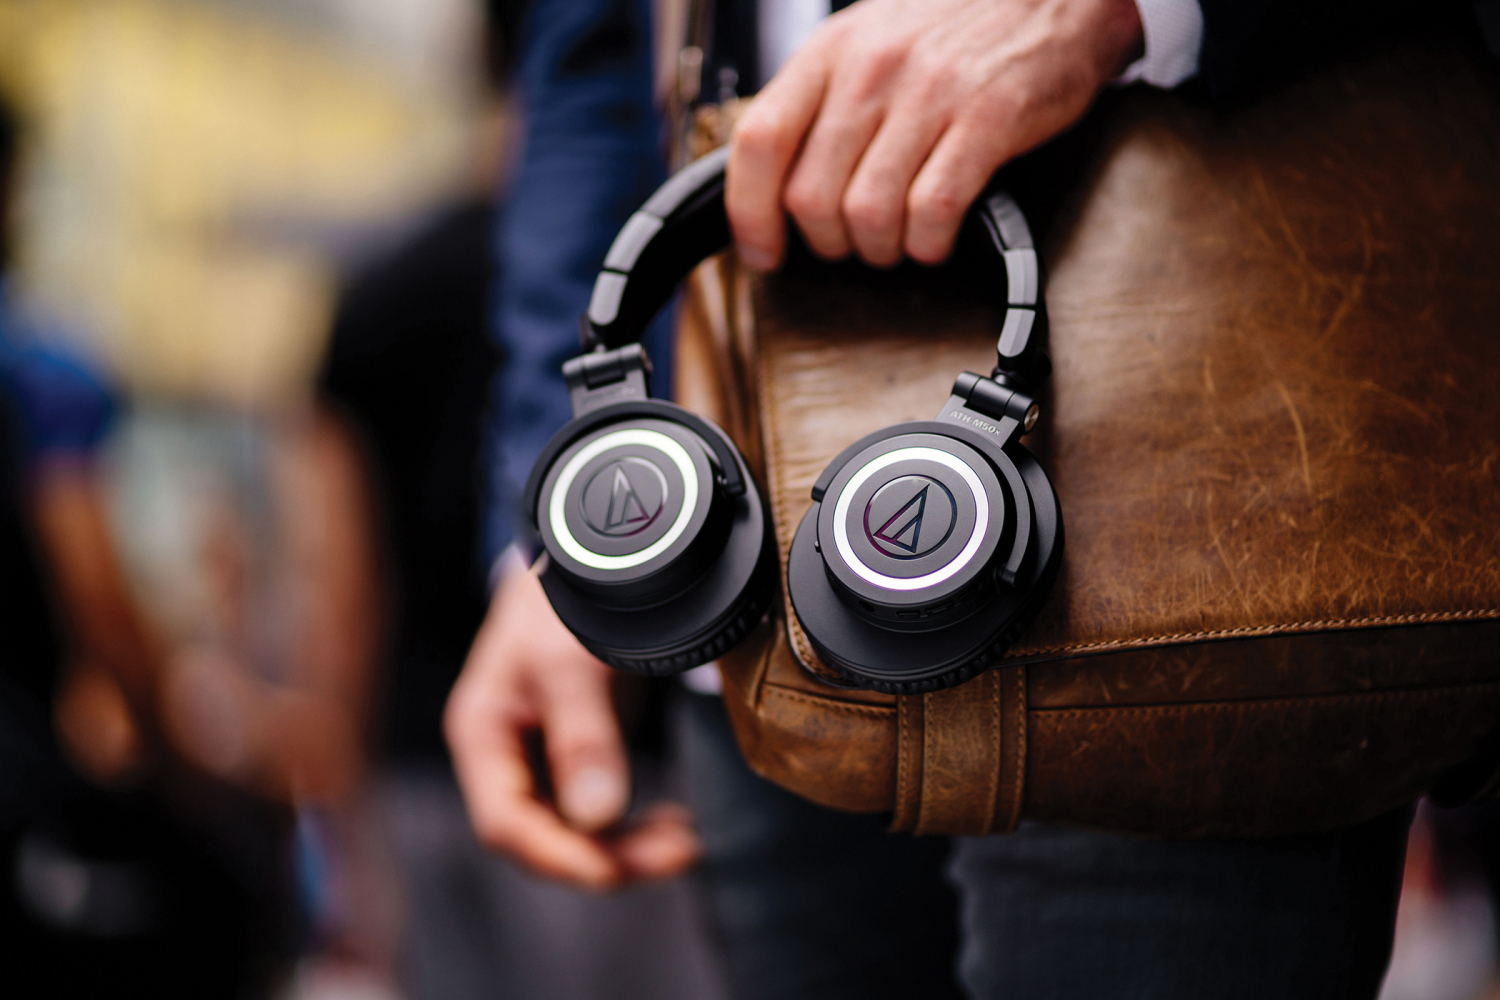 Audio-Technica ATH-M50xBT lifestyle image of the headphones being held by a man's hand against a leather messenger bag.